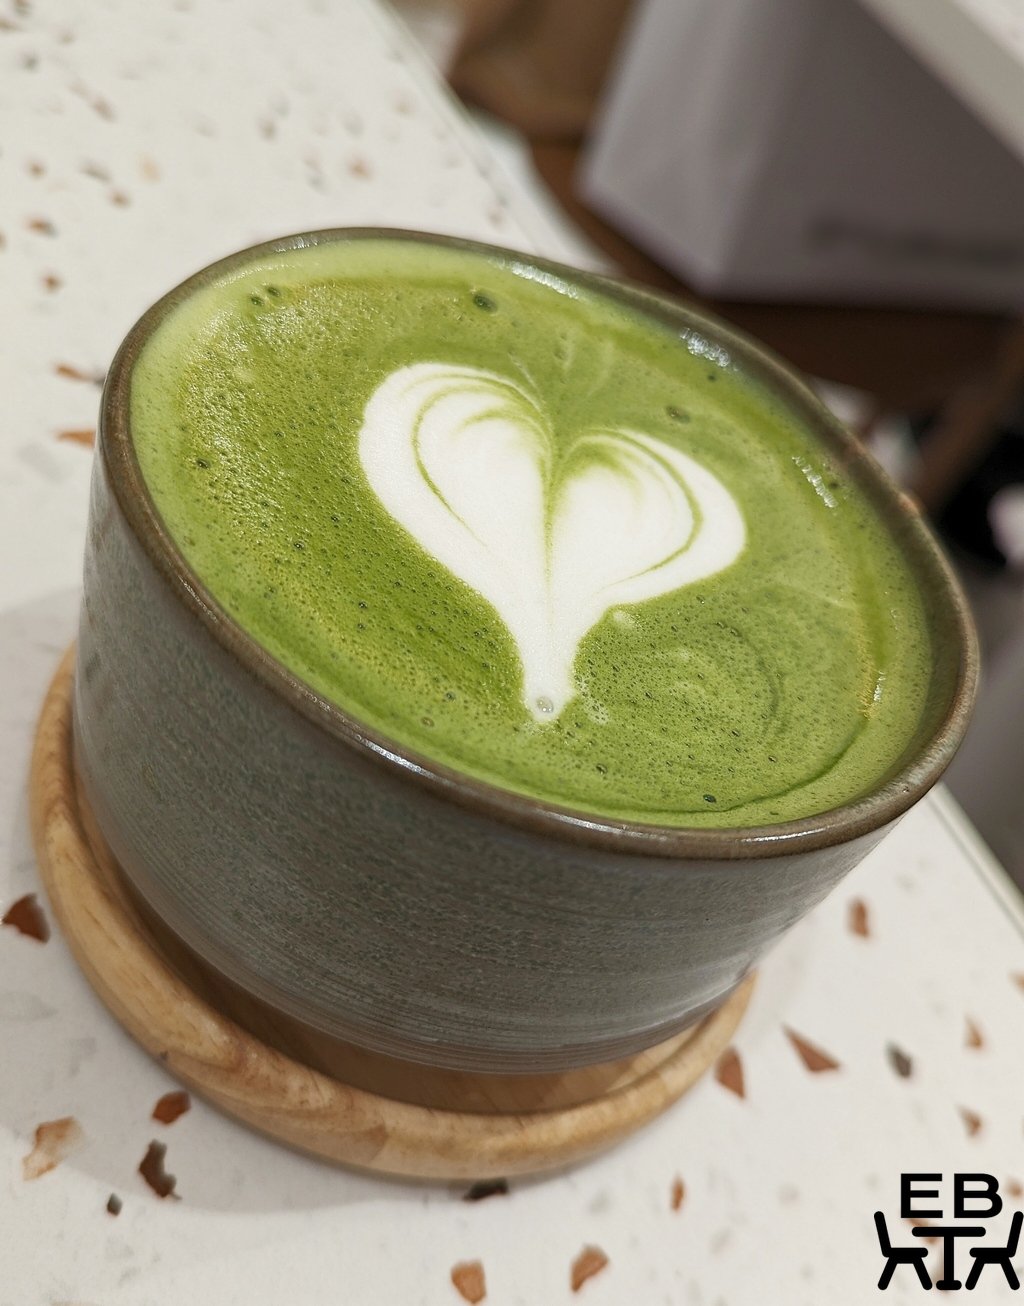 Another angle on the matcha latte, appropriately in a Japanese ceramic cup.